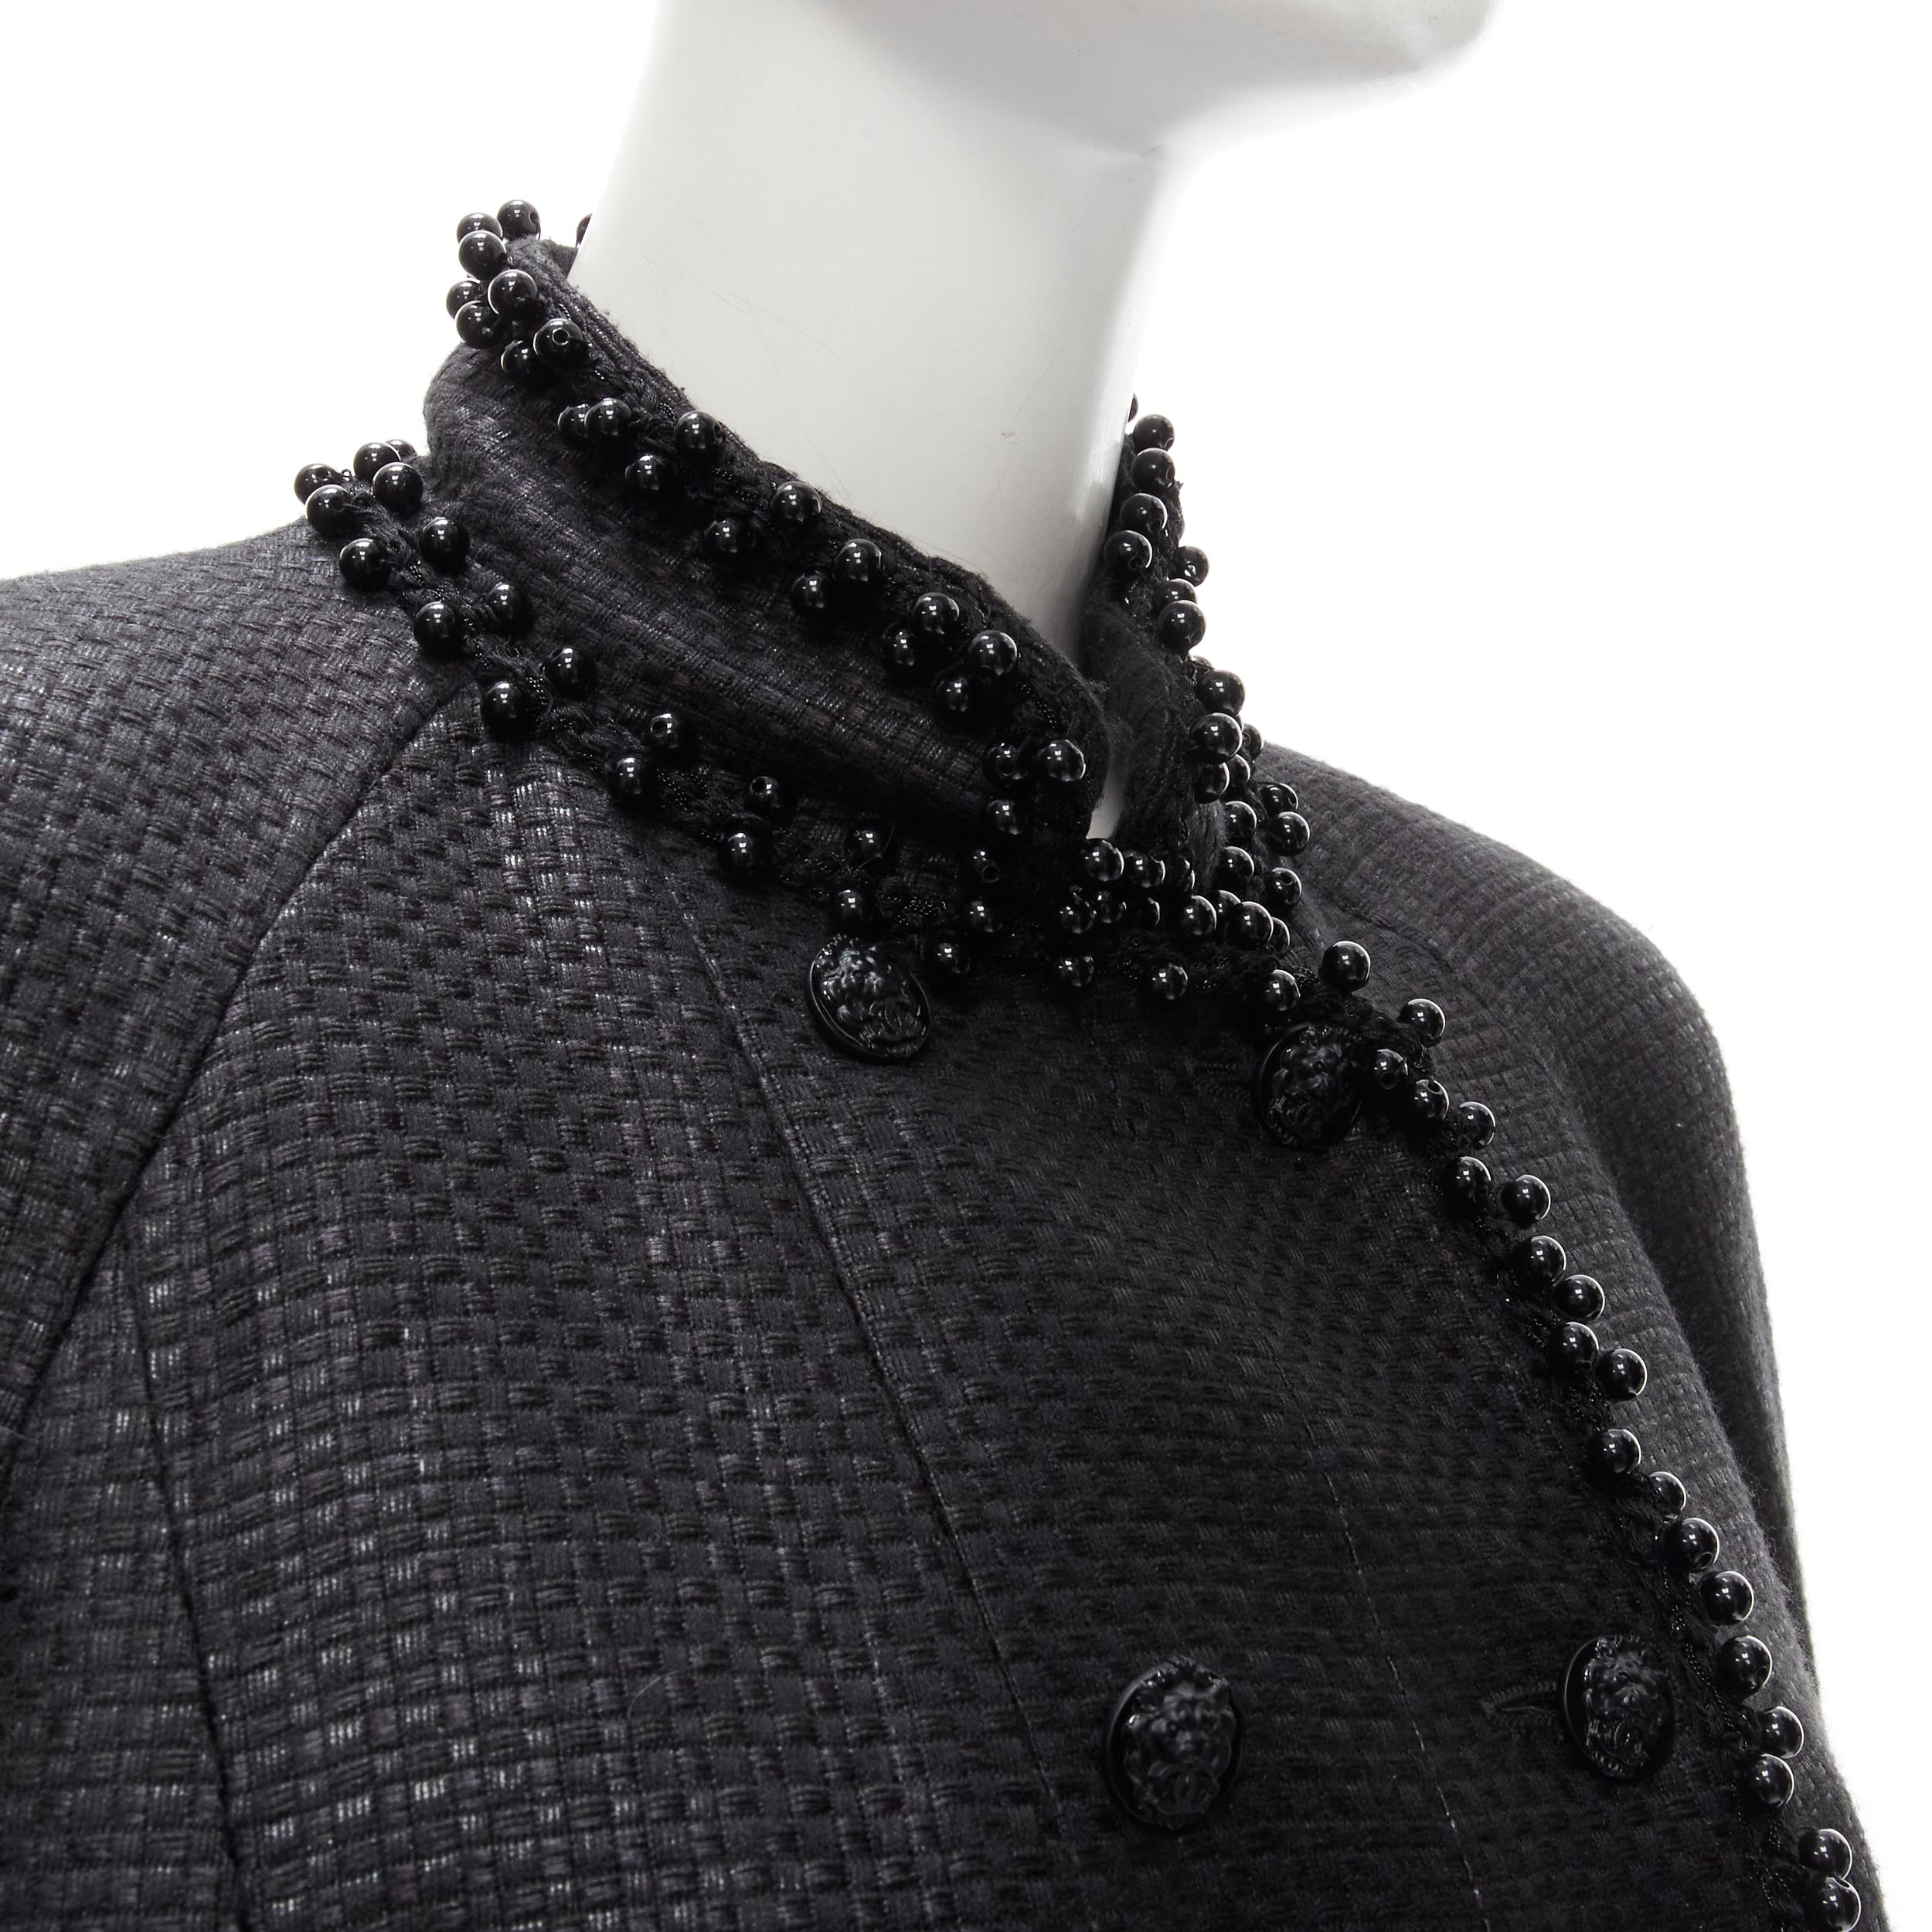 CHANEL lattice lacquered tweed bead embellished Lion CC button jacket FR42 L
Brand: Chanel
Designer: Karl Lagerfeld
Collection: Circa 2009 
Material: Acrylic
Color: Black
Pattern: Solid
Closure: Button
Extra Detail: So Black lattice weave tweed.